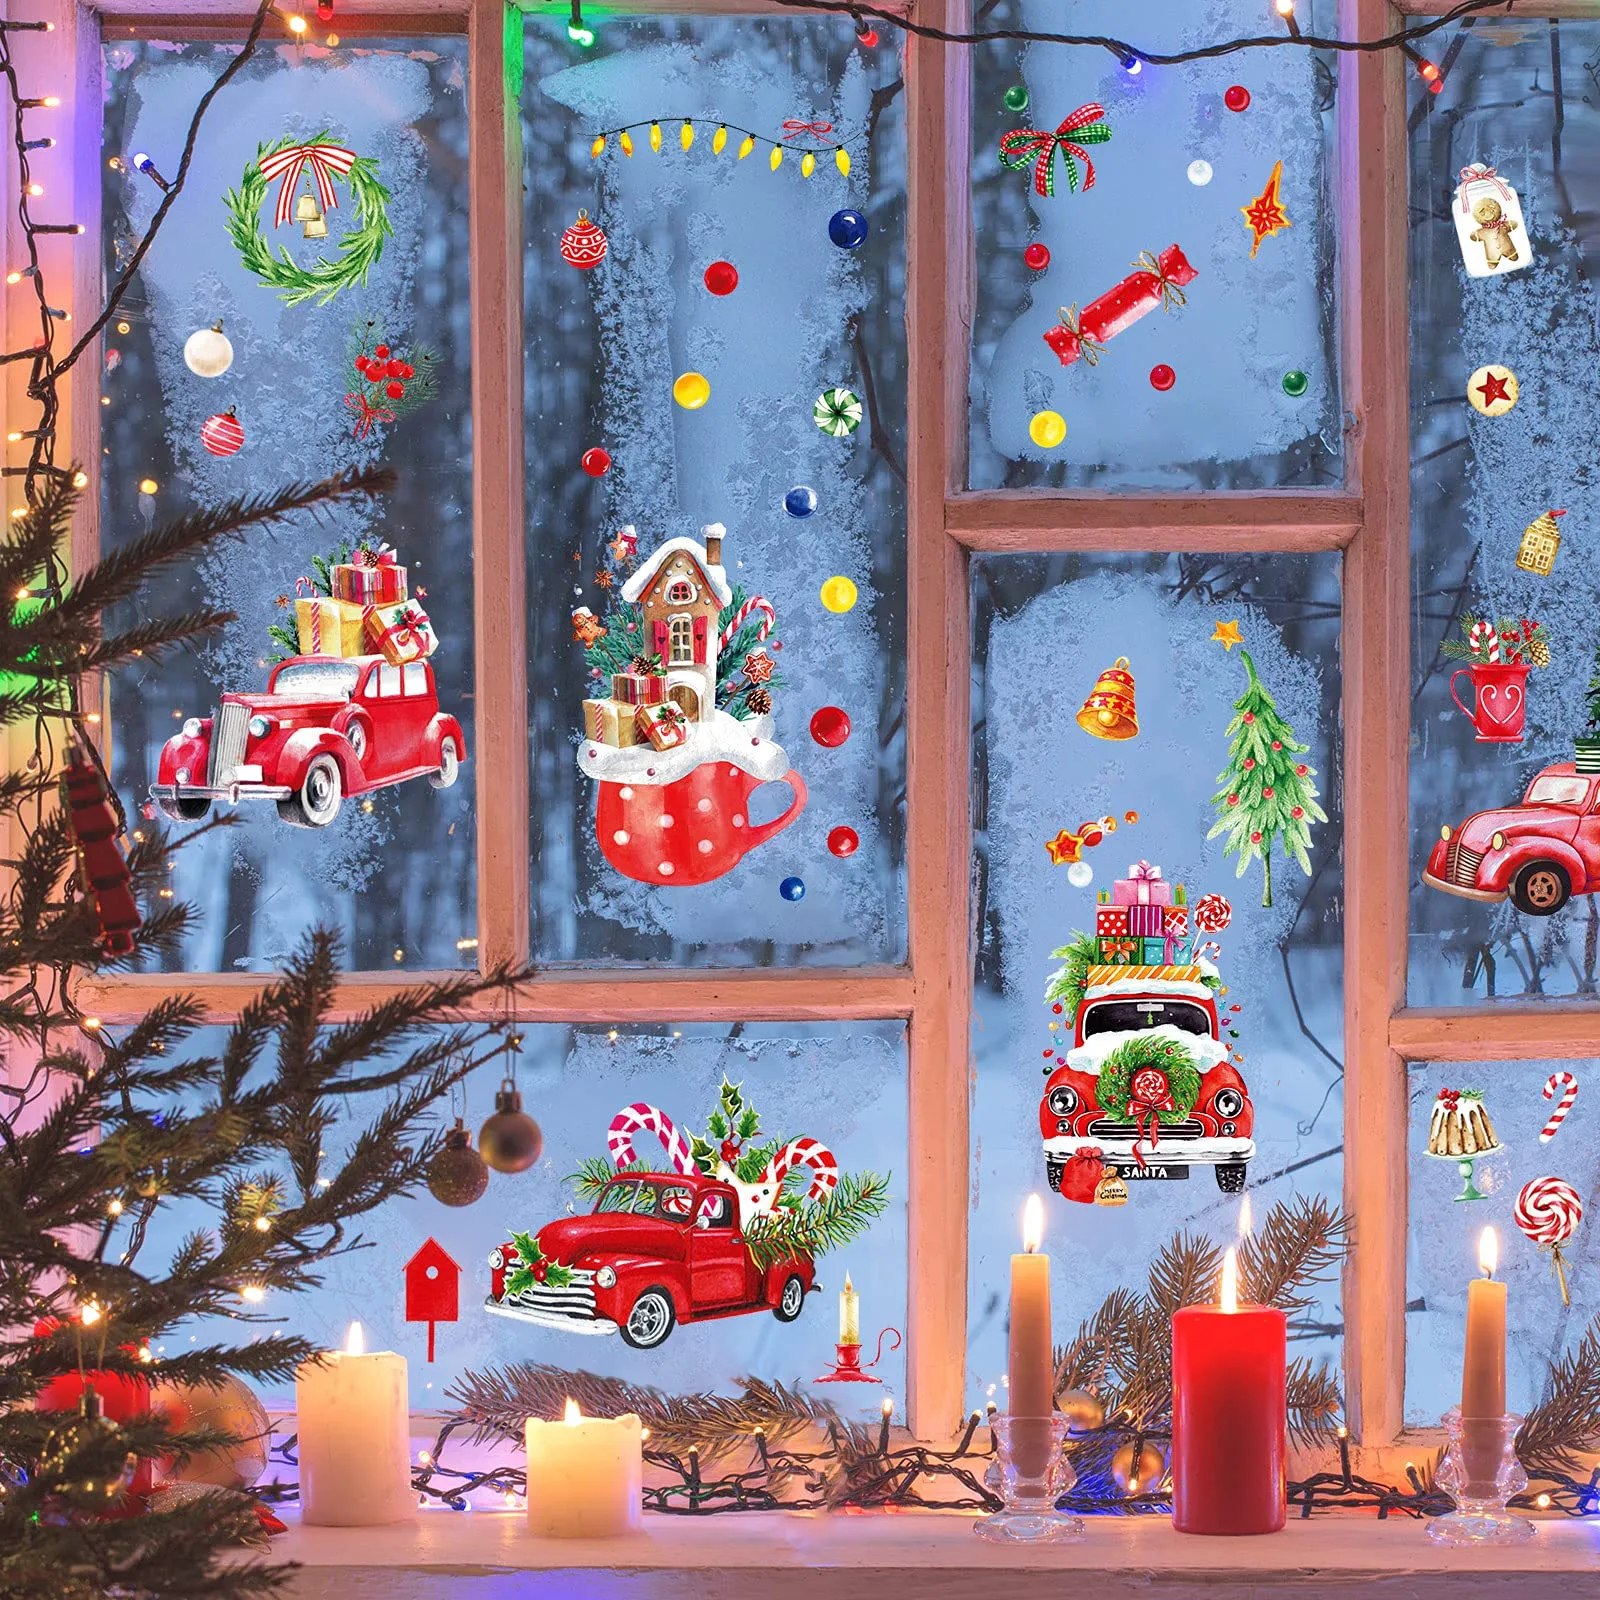 9 sheets christmas window clings red truck christmas window stickers holiday window decal christmas decorations farmhouse christmas window decals xmas large glass decals for glass window door decor